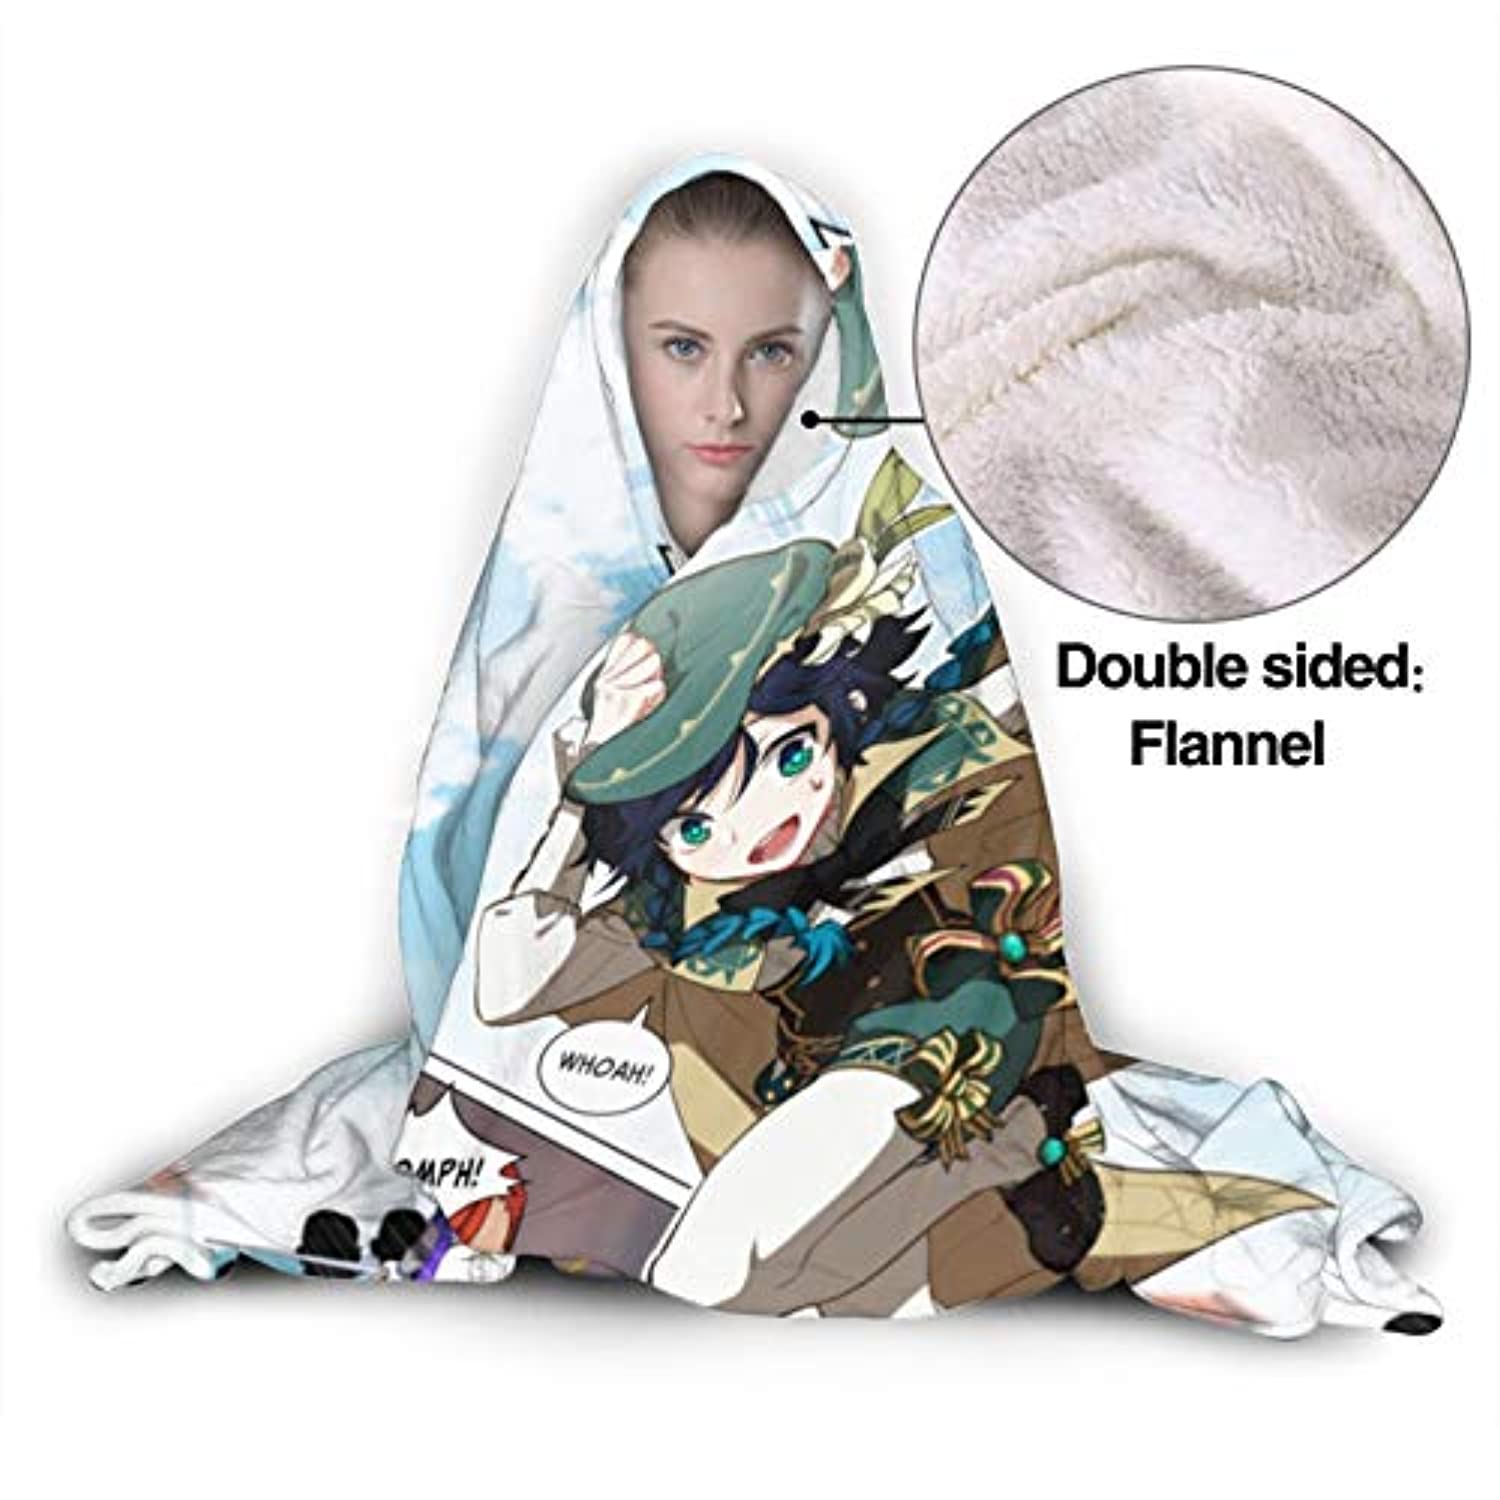 Miu Muu Genshin Impact Hooded Blanket Throw, Plush Flannel Wearable Poncho Blanket Fleece Throw Wrap Cape, Ultra Soft, One Size, Gift For Game Fans